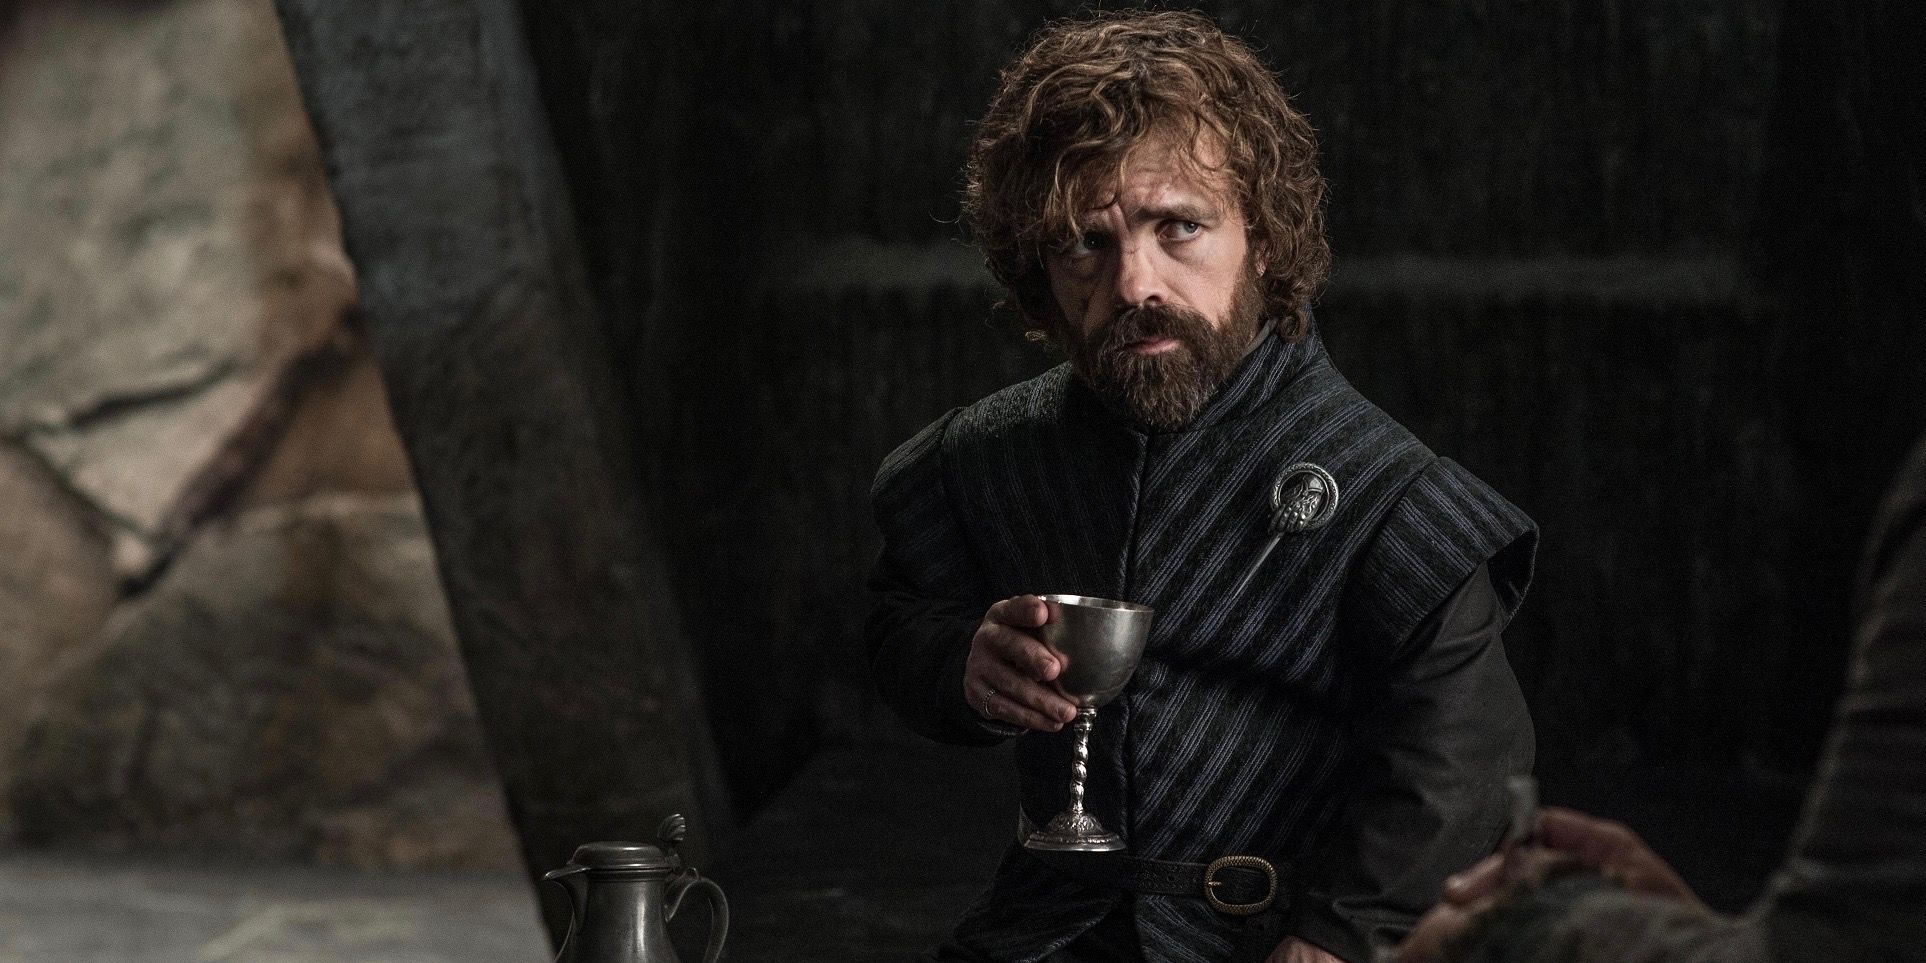 10 New Yearss Resolutions Inspired by Game of Thrones Characters